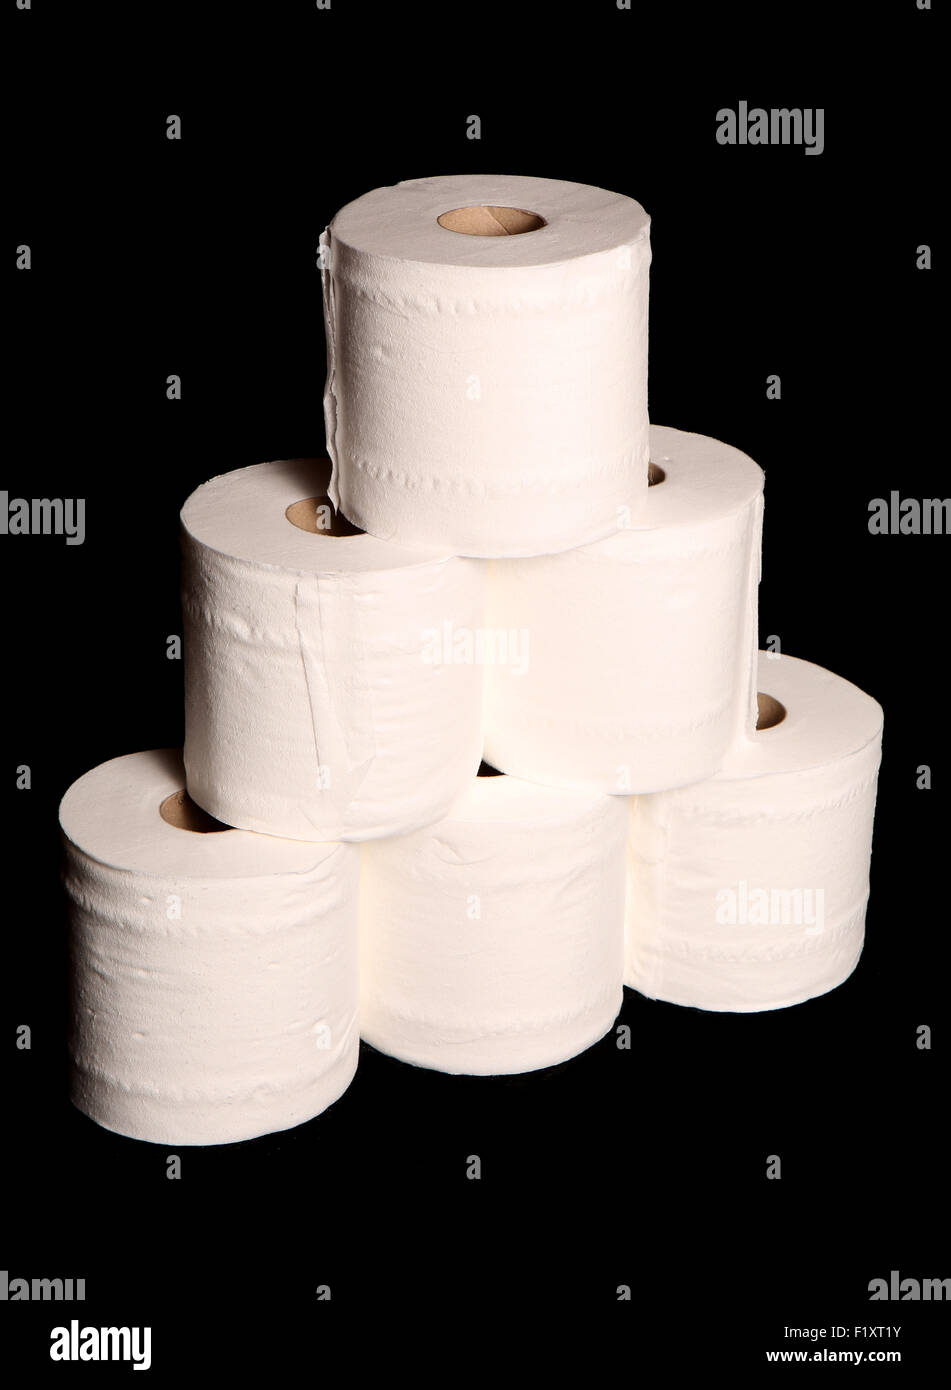 Stack Of Toilet Paper Rolls On Black Background Stock Photo Alamy